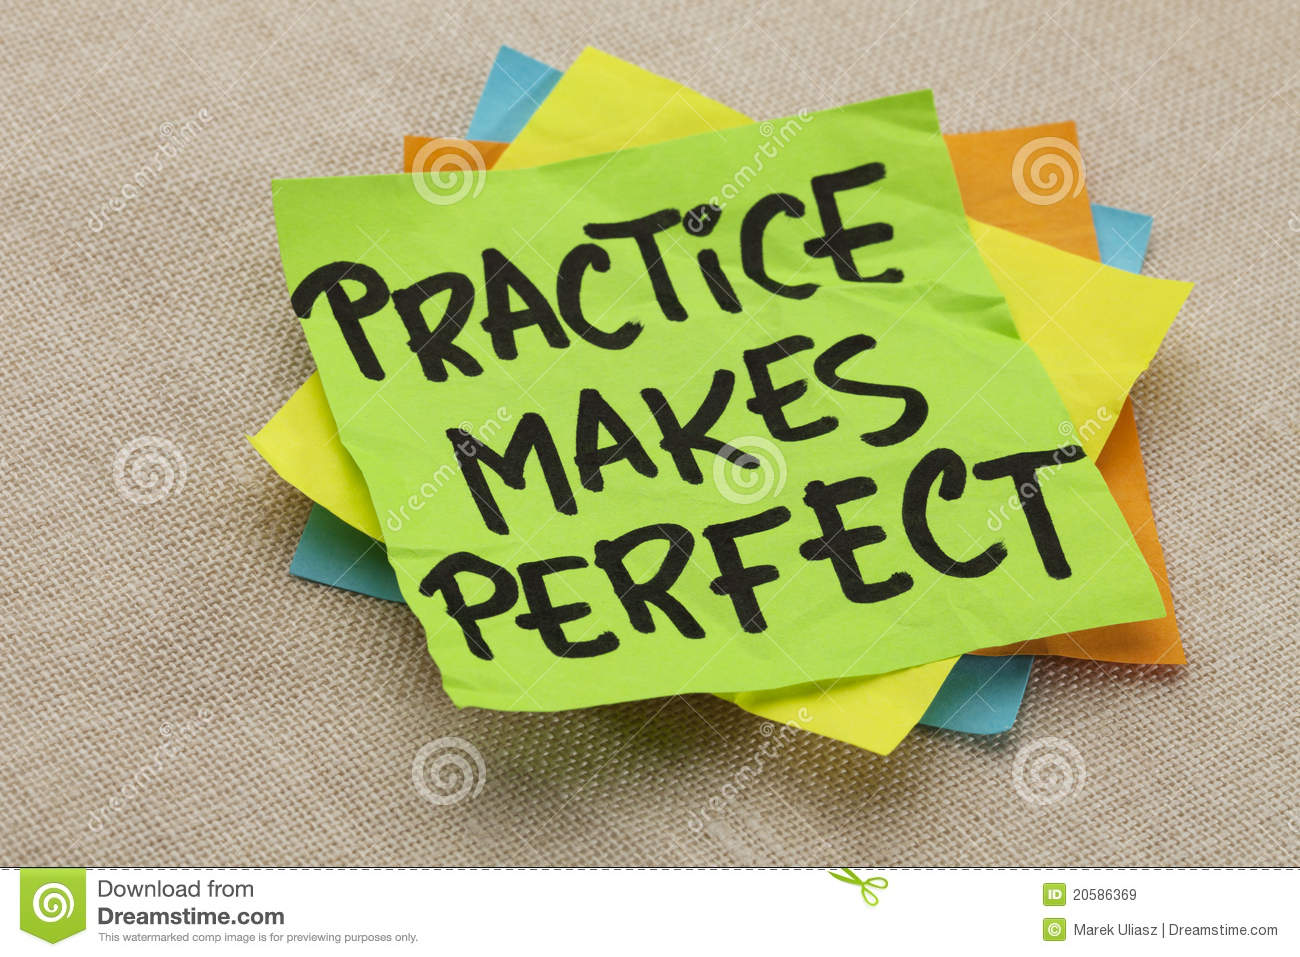 Practice Makes Perfect   A Motivational Slogan On A Green Stocky Note 